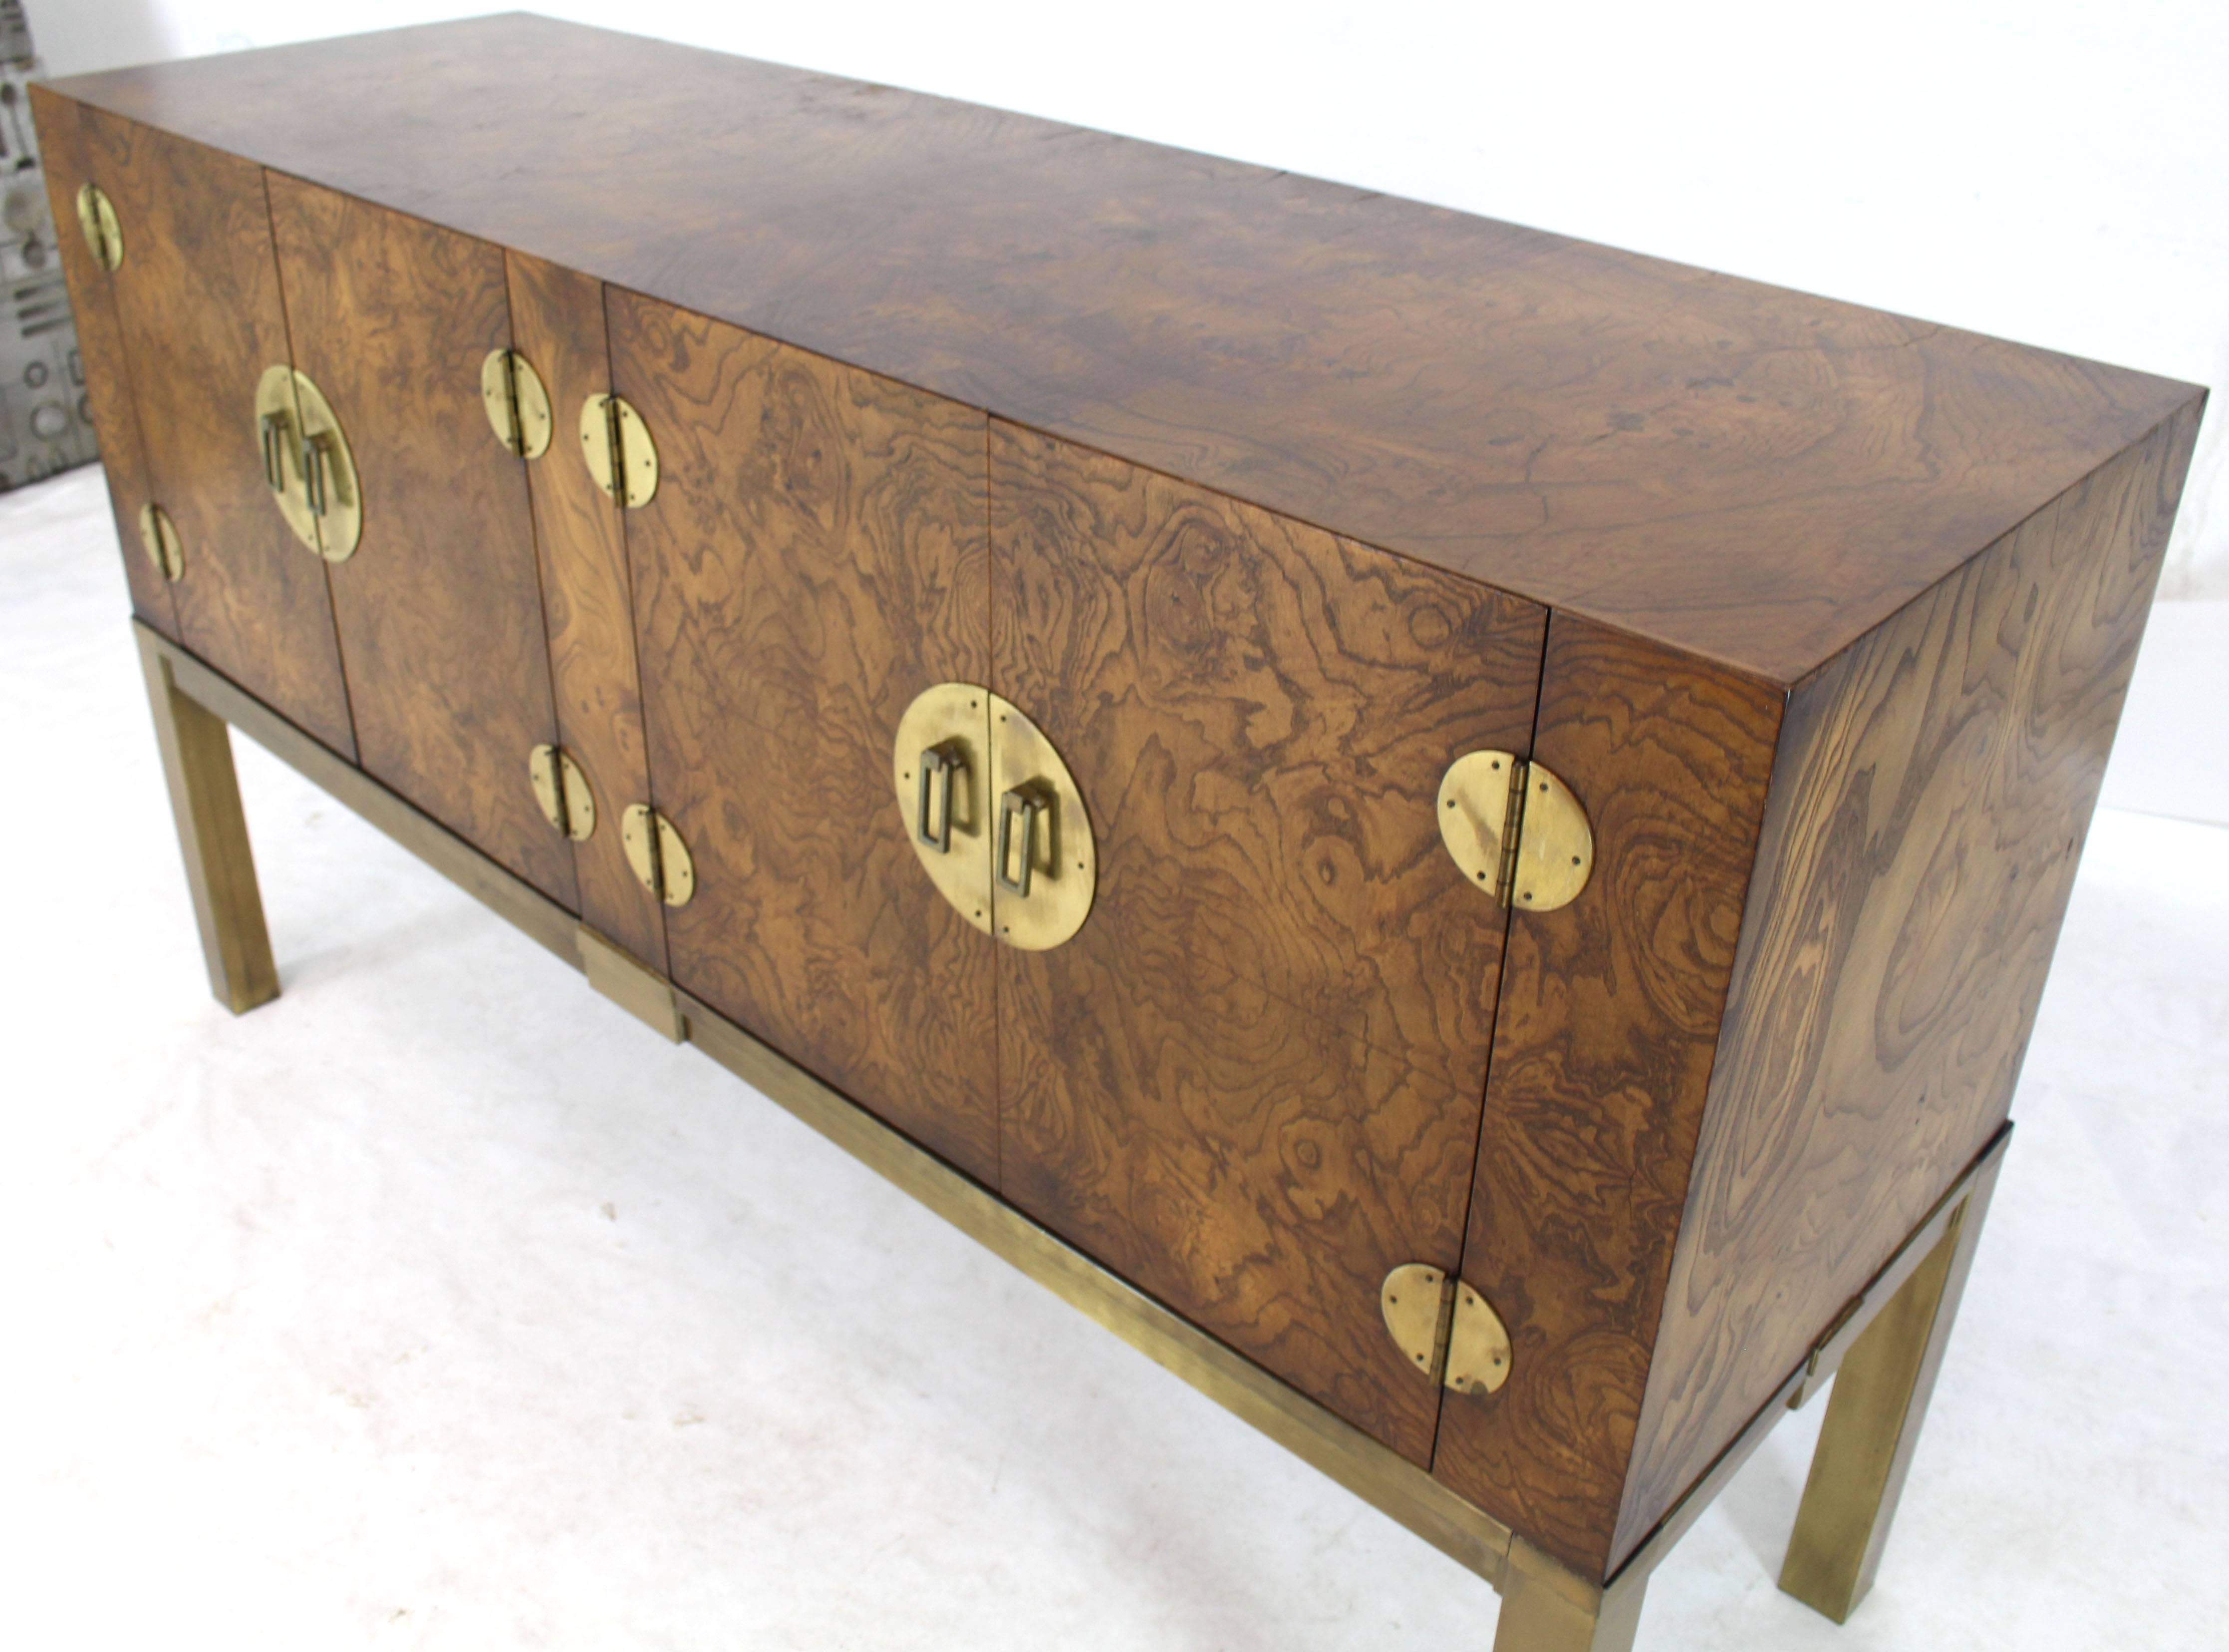 20th Century Burl Wood and Solid Brass Hardware Compact Double Doors Credenza